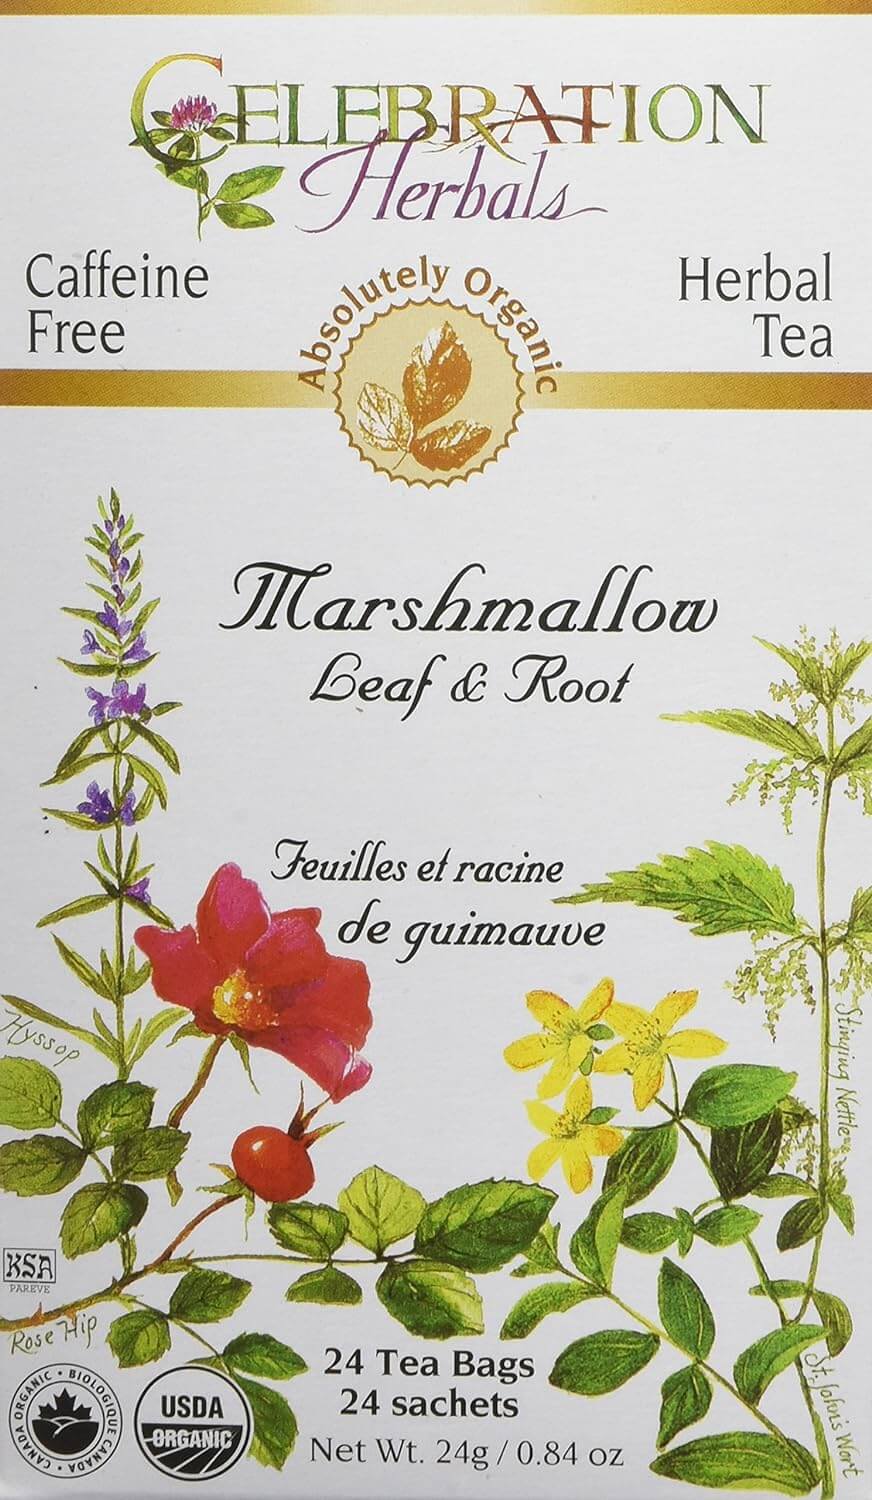 CELEBRATION HERBALS Marshmallow Leaf & Root